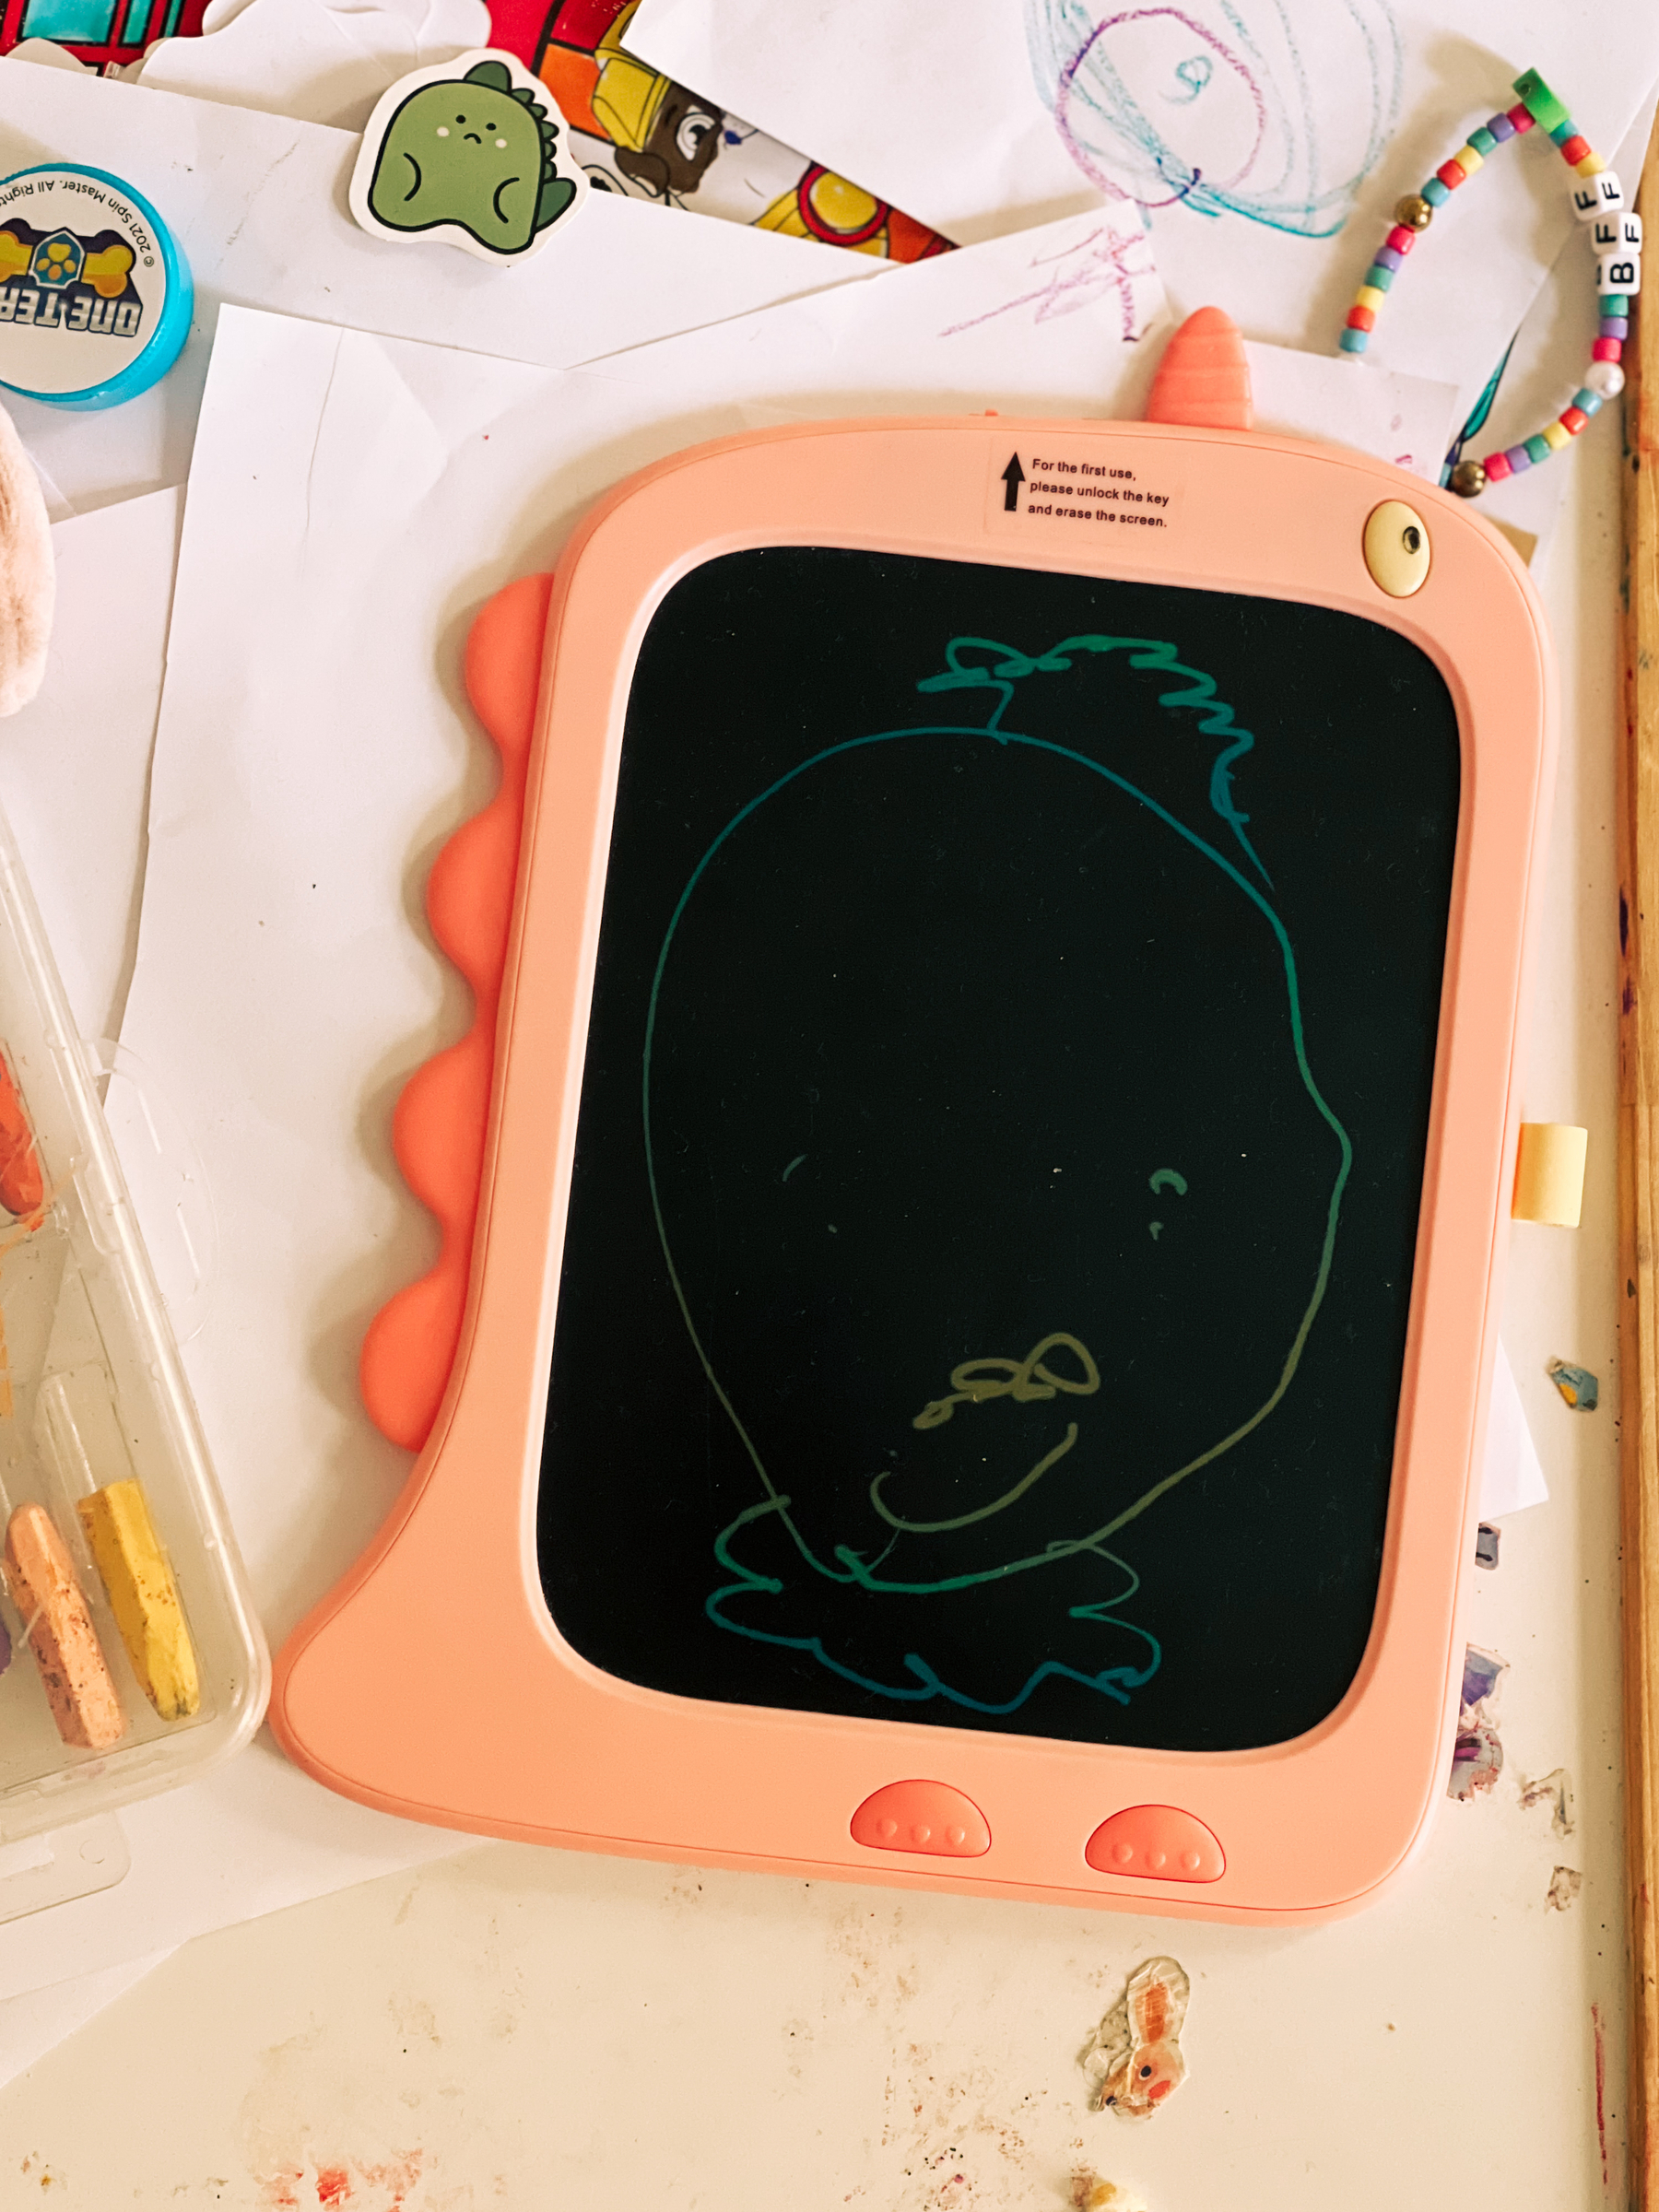 A child&rsquo;s magnetic drawing board with a simple doodle on it, depicting a smiley face with hair, surrounded by various art supplies and drawings on a messy table.